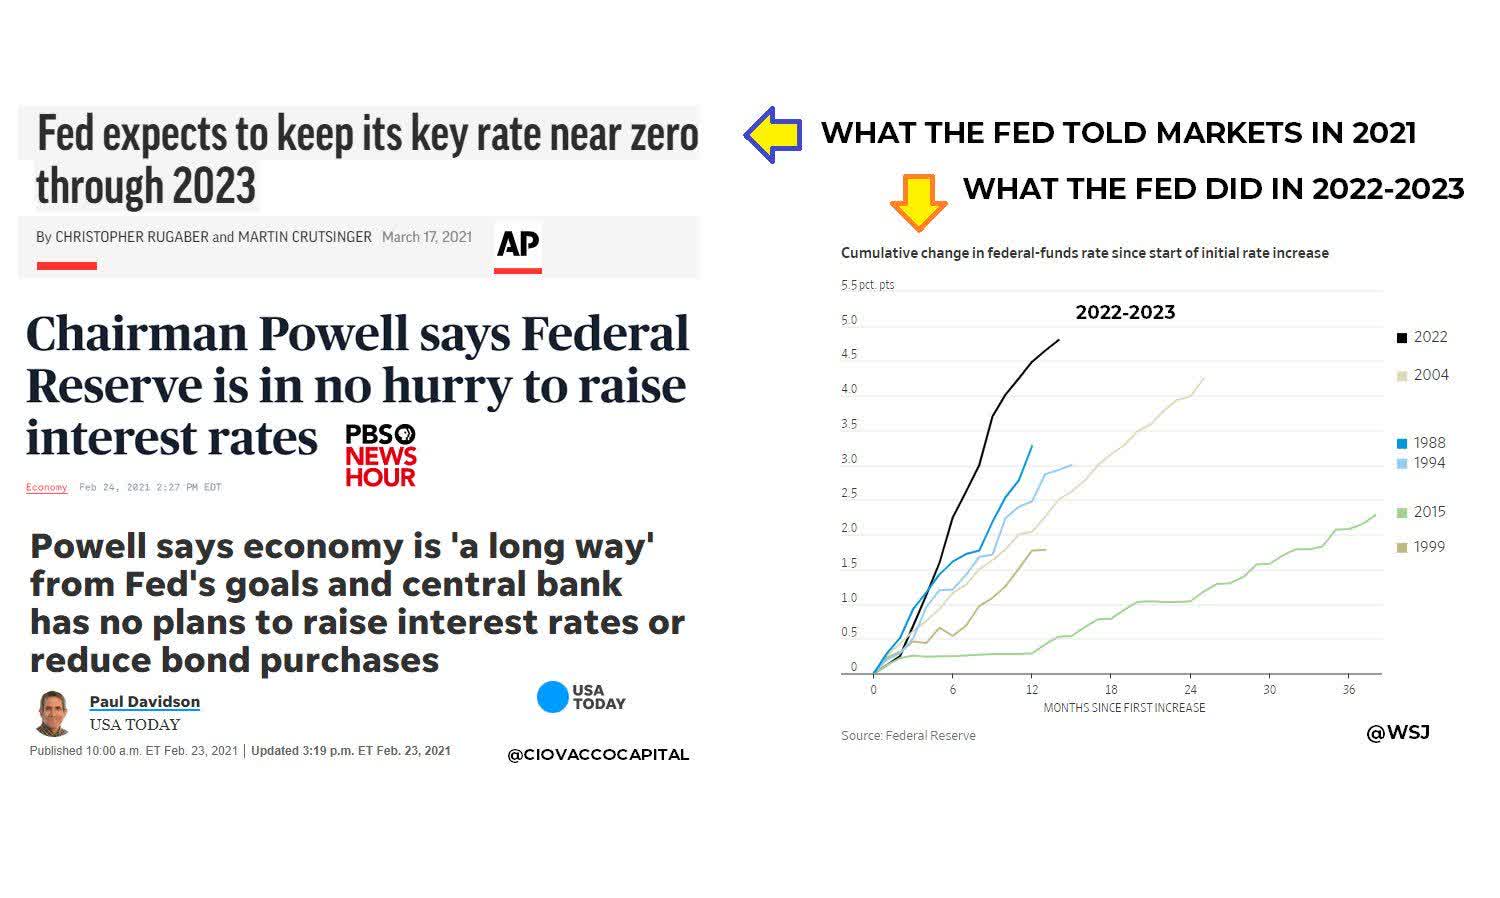 What the Fed said and what they did